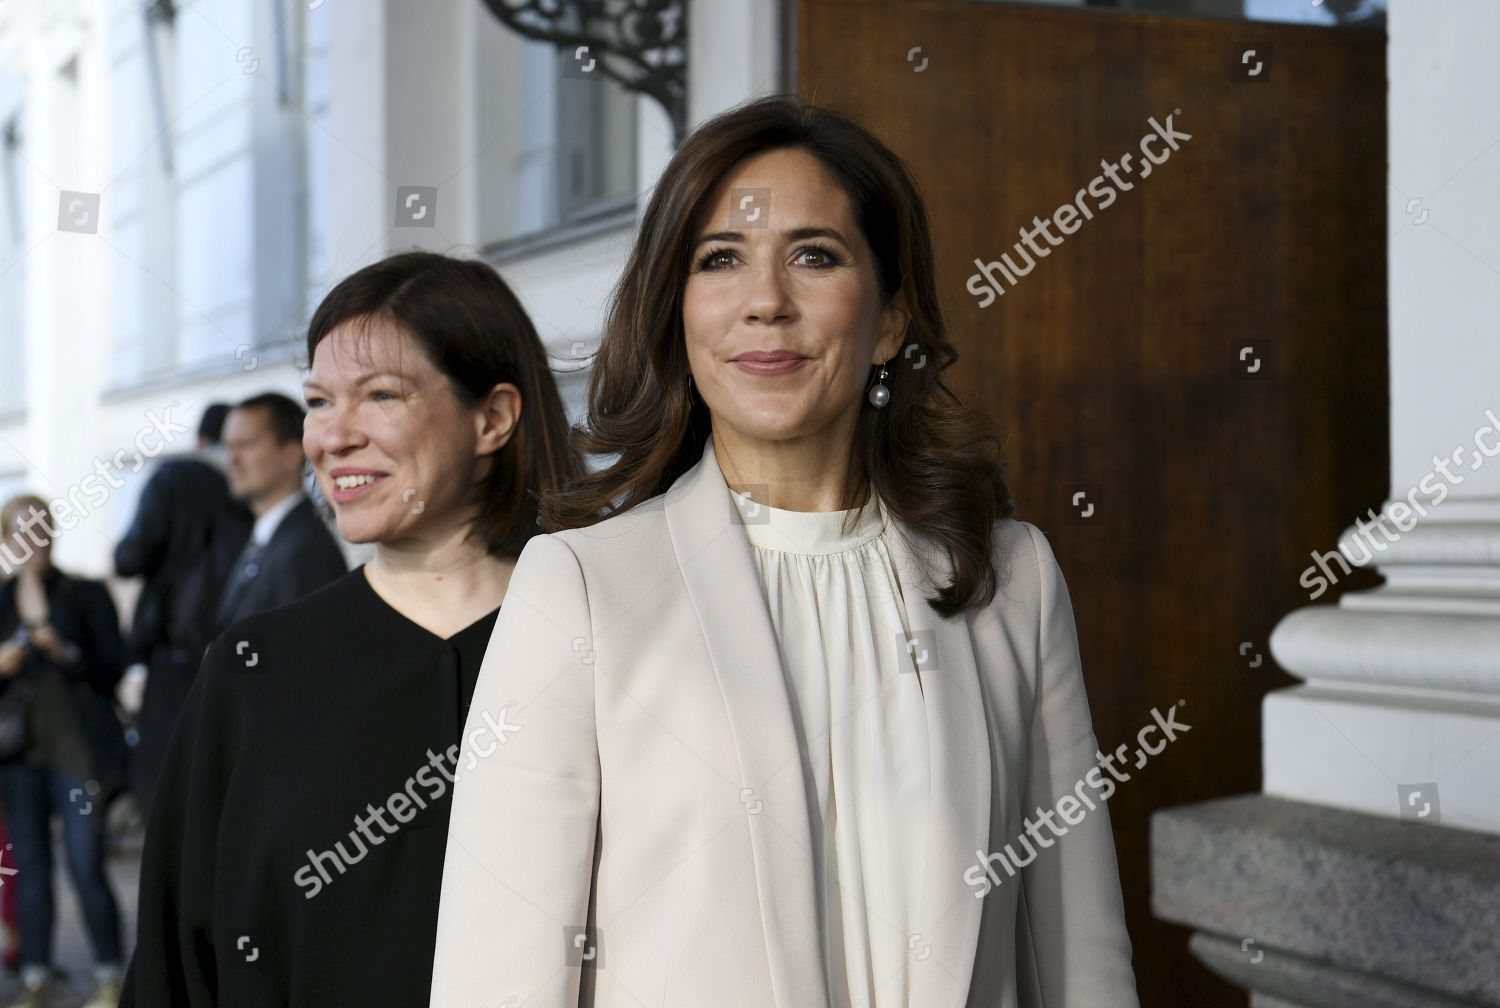 crown-princess-mary-visit-to-finland-shutterstock-editorial-9881096c.jpg